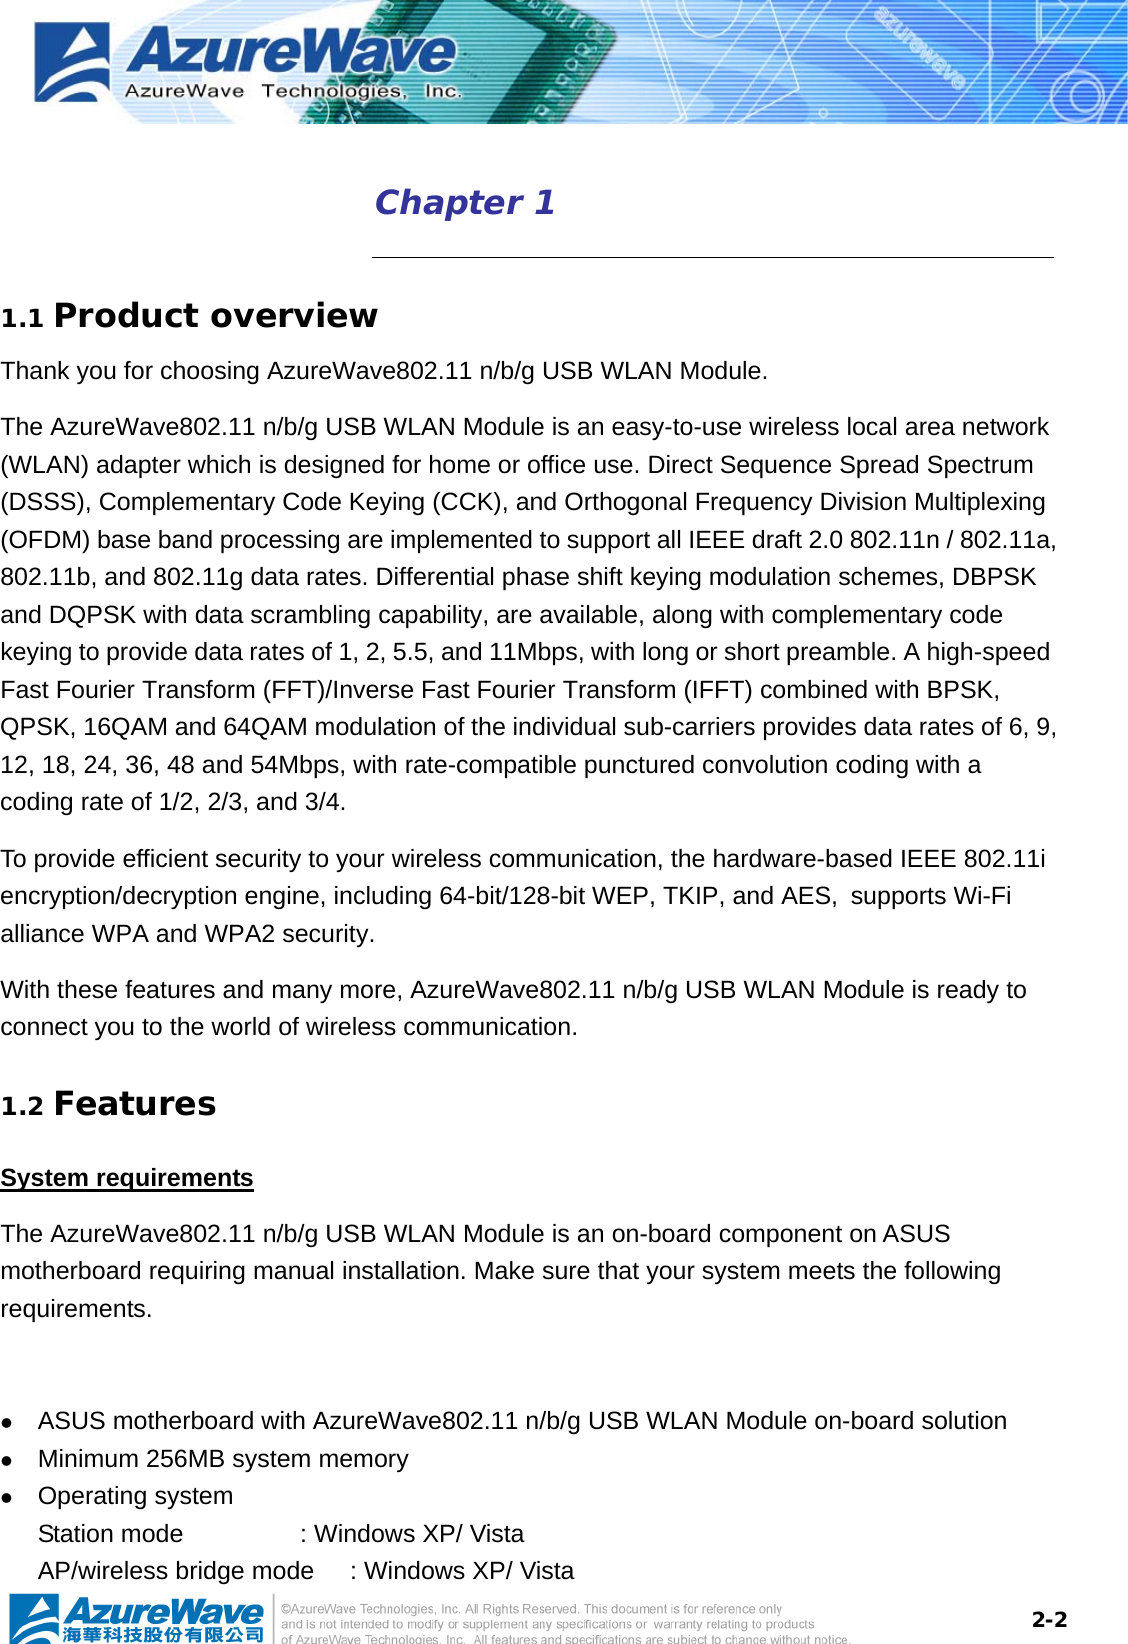  2-2Chapter 1    1.1 Product overview Thank you for choosing AzureWave802.11 n/b/g USB WLAN Module.   The AzureWave802.11 n/b/g USB WLAN Module is an easy-to-use wireless local area network (WLAN) adapter which is designed for home or office use. Direct Sequence Spread Spectrum (DSSS), Complementary Code Keying (CCK), and Orthogonal Frequency Division Multiplexing (OFDM) base band processing are implemented to support all IEEE draft 2.0 802.11n / 802.11a, 802.11b, and 802.11g data rates. Differential phase shift keying modulation schemes, DBPSK and DQPSK with data scrambling capability, are available, along with complementary code keying to provide data rates of 1, 2, 5.5, and 11Mbps, with long or short preamble. A high-speed Fast Fourier Transform (FFT)/Inverse Fast Fourier Transform (IFFT) combined with BPSK, QPSK, 16QAM and 64QAM modulation of the individual sub-carriers provides data rates of 6, 9, 12, 18, 24, 36, 48 and 54Mbps, with rate-compatible punctured convolution coding with a coding rate of 1/2, 2/3, and 3/4.   To provide efficient security to your wireless communication, the hardware-based IEEE 802.11i encryption/decryption engine, including 64-bit/128-bit WEP, TKIP, and AES, supports Wi-Fi alliance WPA and WPA2 security. With these features and many more, AzureWave802.11 n/b/g USB WLAN Module is ready to connect you to the world of wireless communication. 1.2 Features System requirements The AzureWave802.11 n/b/g USB WLAN Module is an on-board component on ASUS motherboard requiring manual installation. Make sure that your system meets the following requirements.  z ASUS motherboard with AzureWave802.11 n/b/g USB WLAN Module on-board solution   z Minimum 256MB system memory z Operating system Station mode      : Windows XP/ Vista   AP/wireless bridge mode  : Windows XP/ Vista 